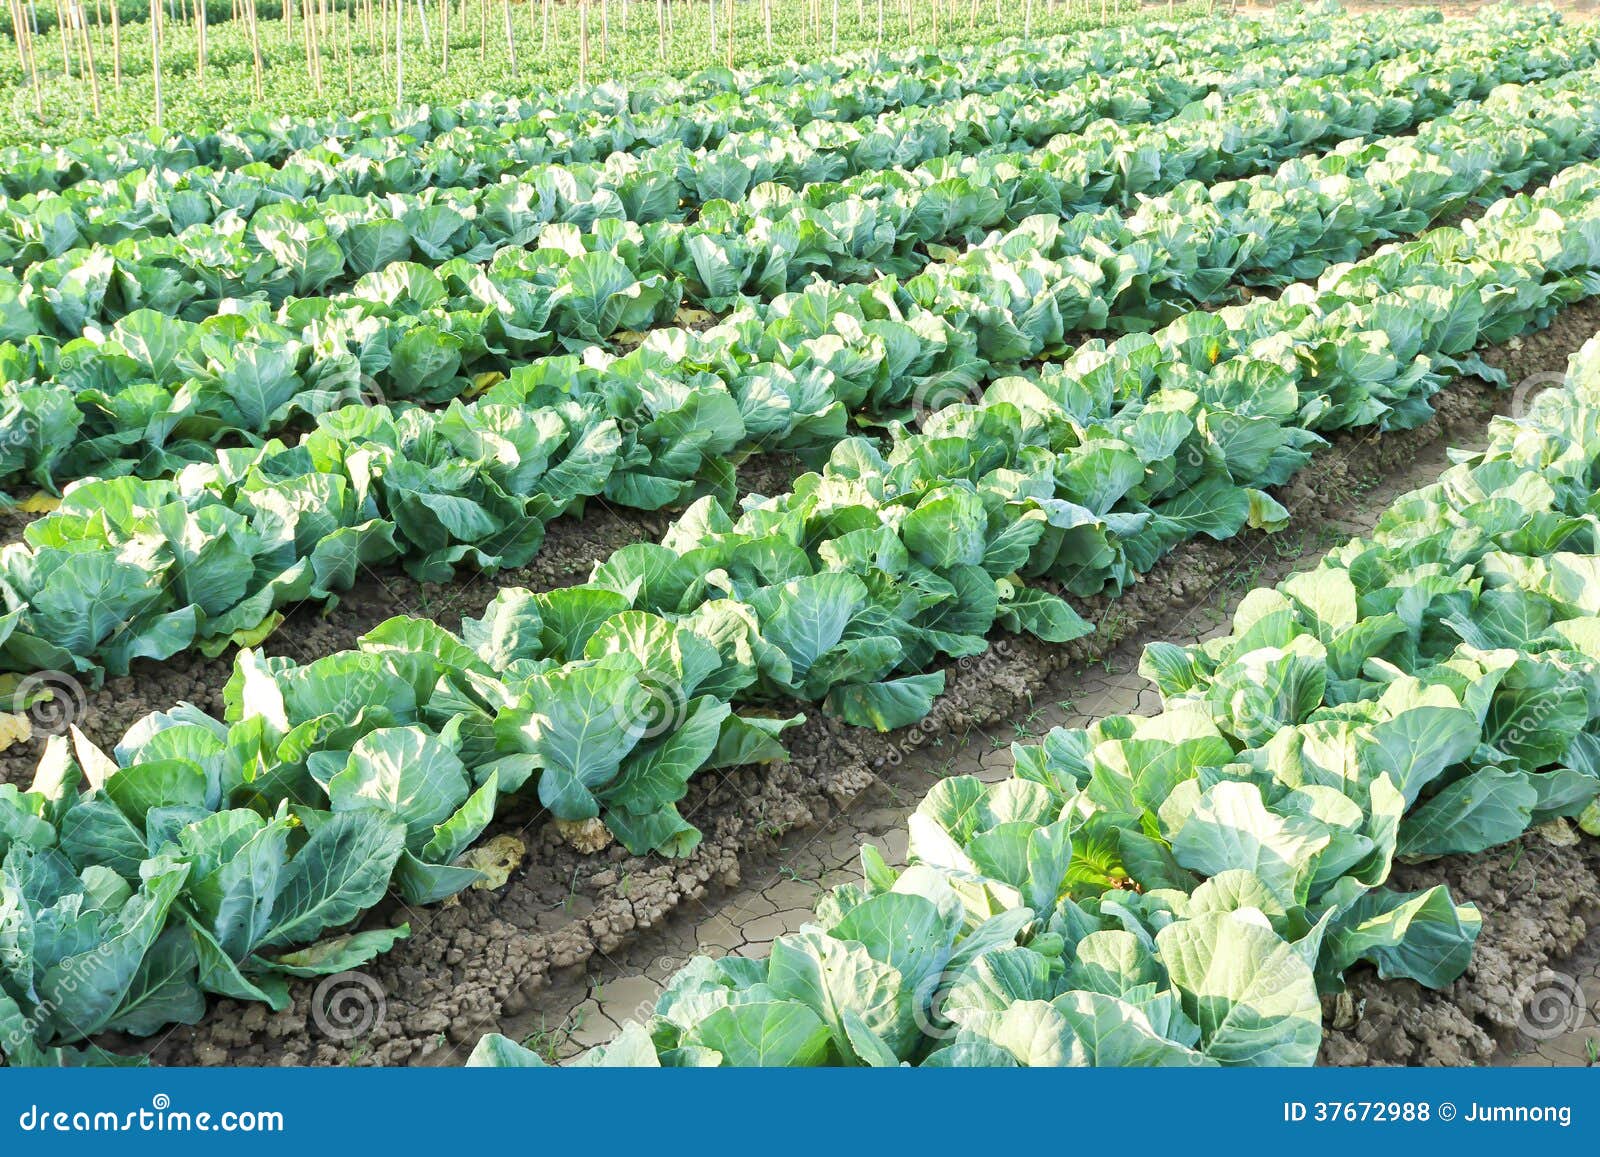 Agri Sba Cabbage Production Case Study Solution & Analysis